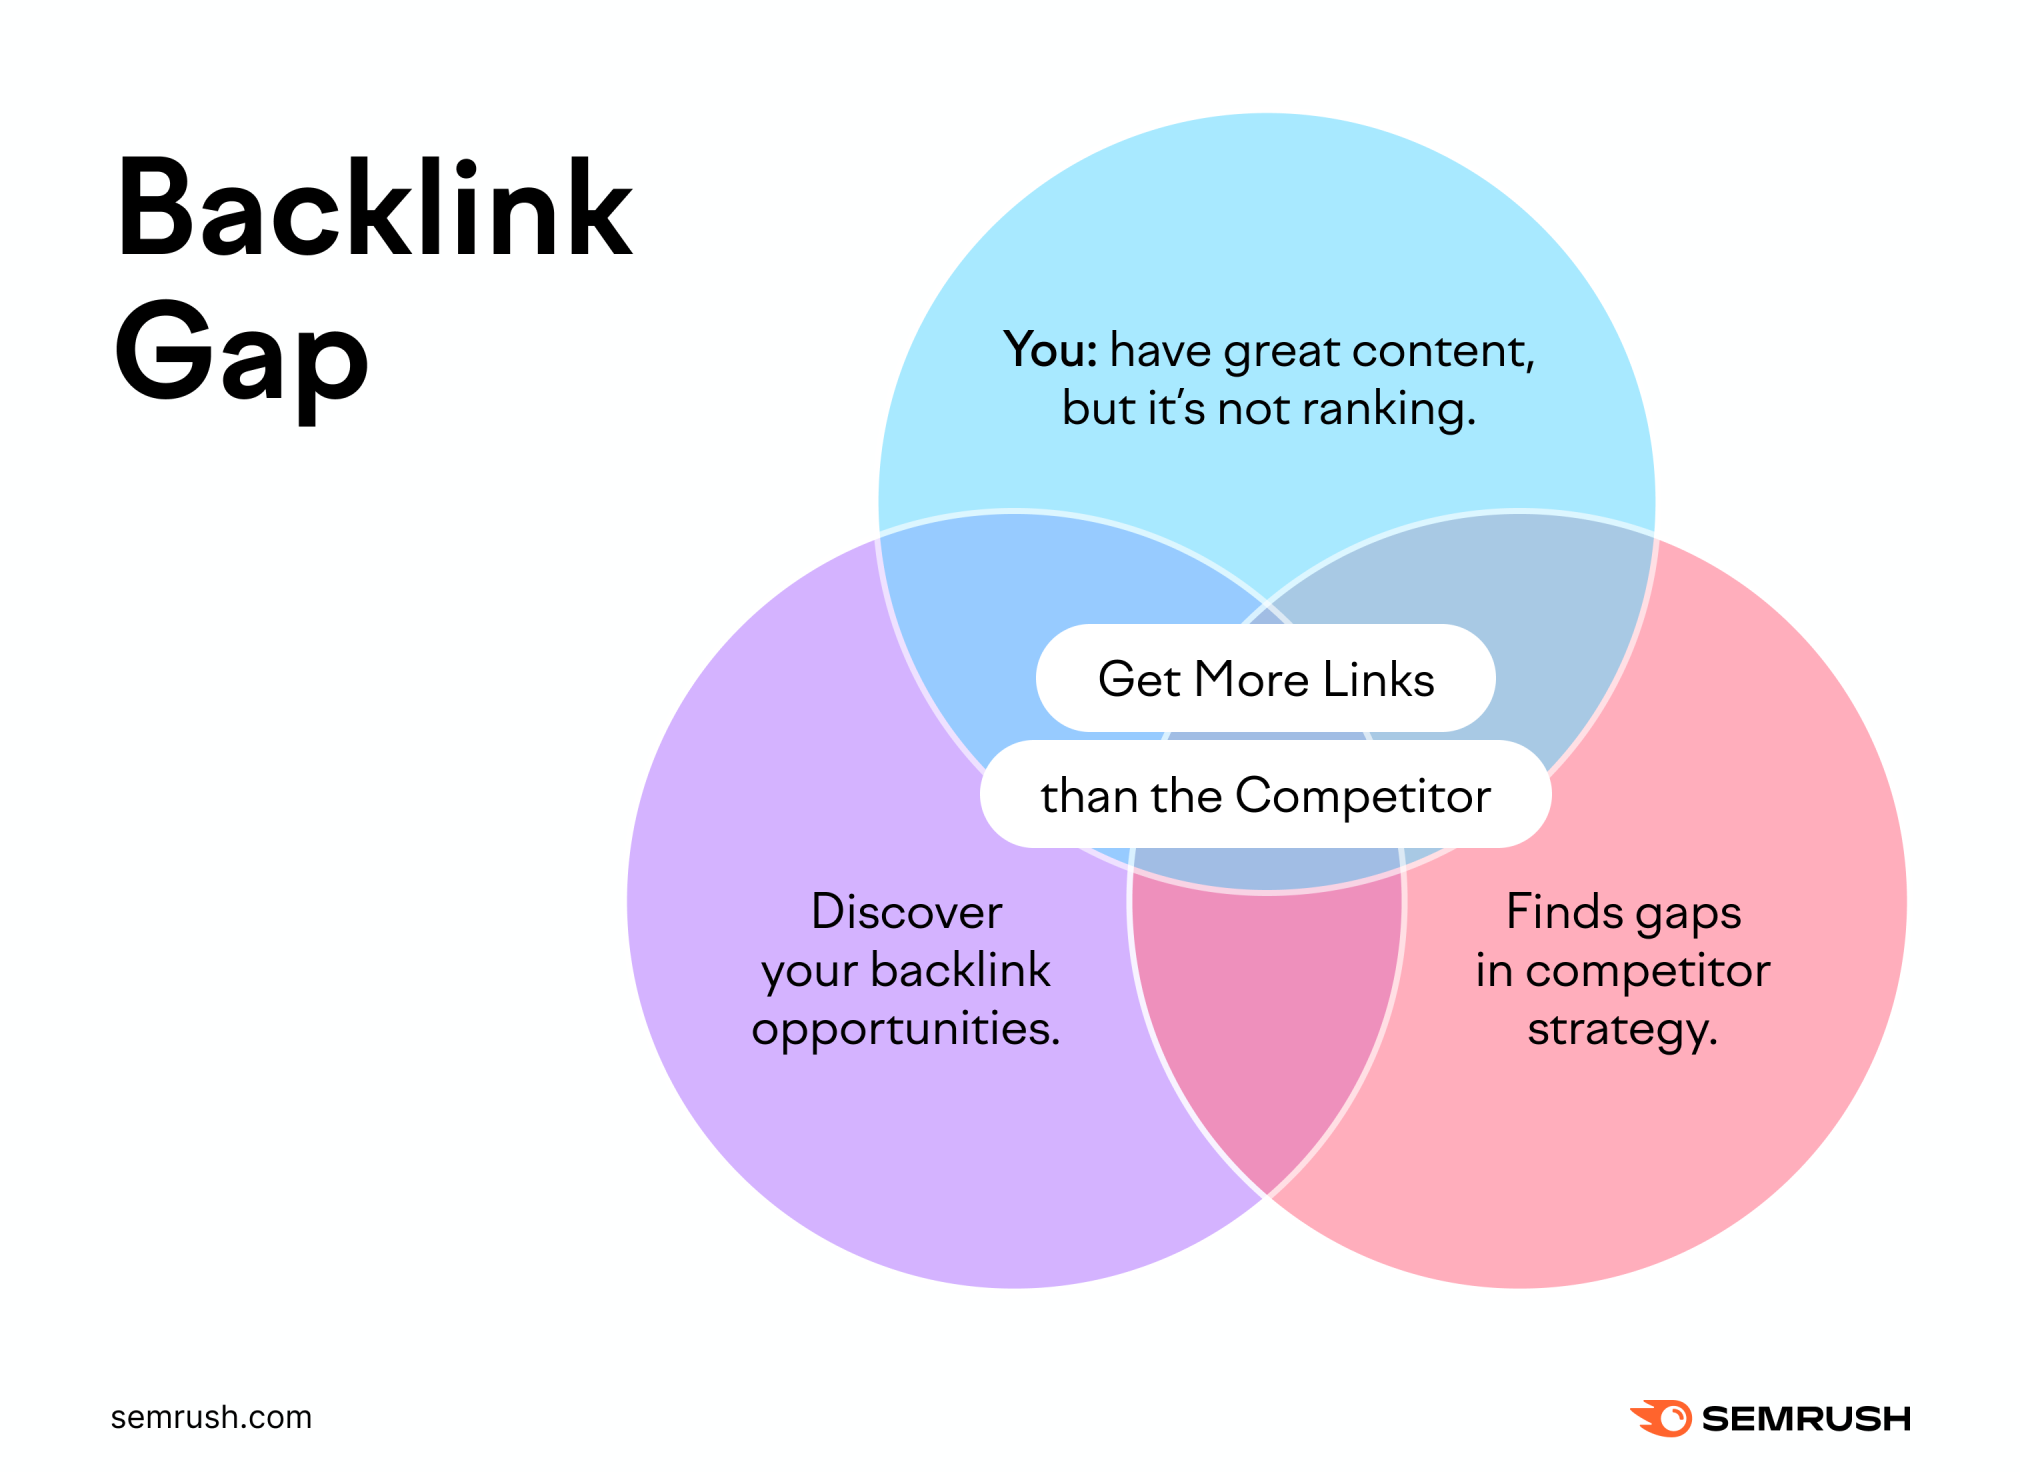 Backlink gap helps you get more backlinks than your competitors